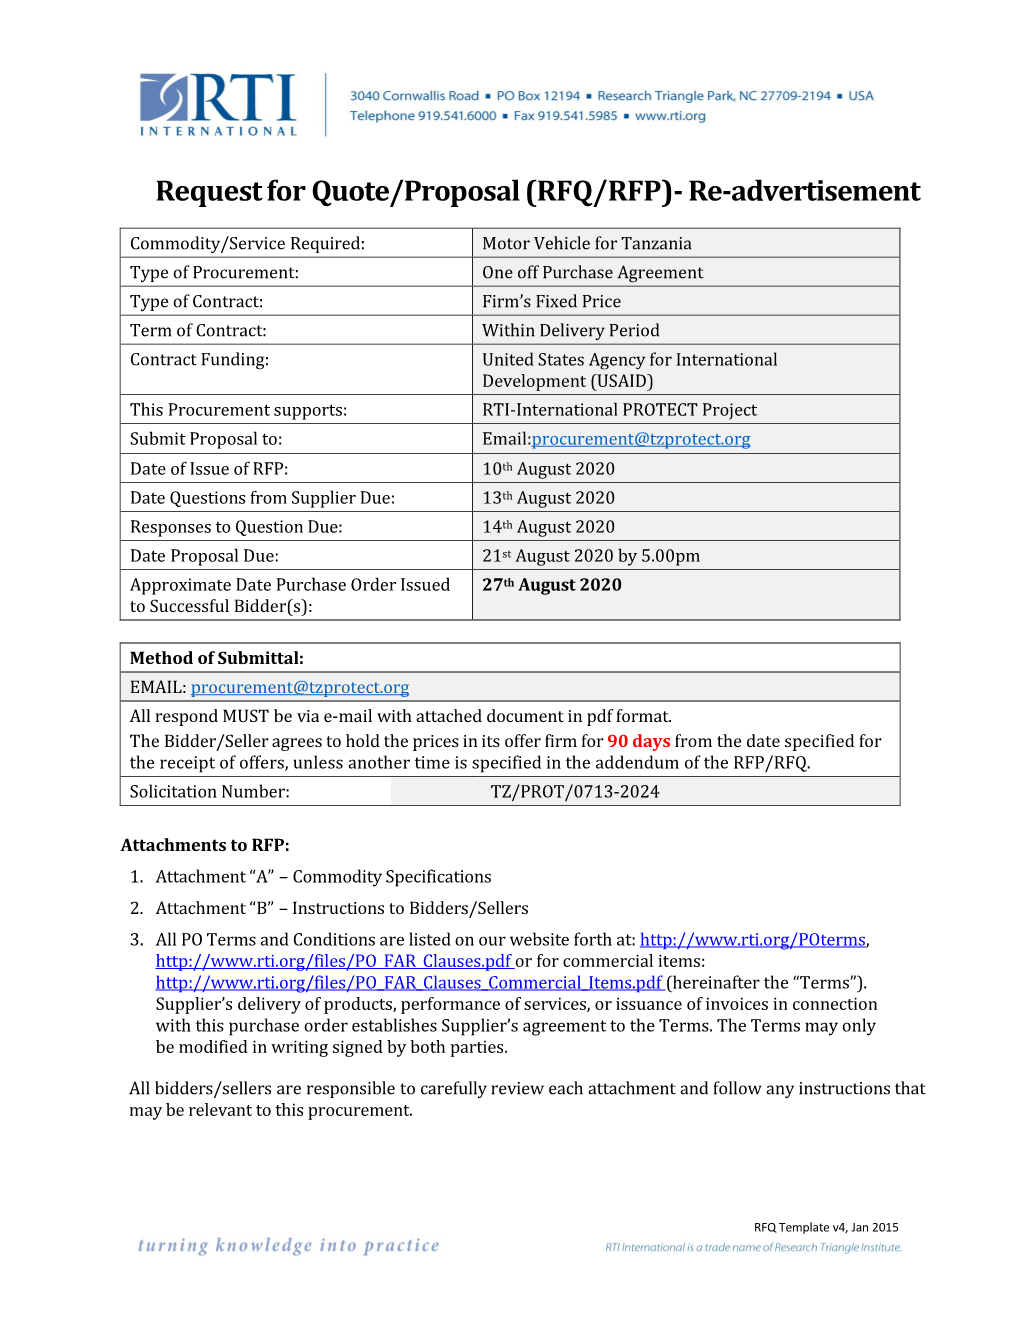 Request for Quote/Proposal (RFQ/RFP)- Re-Advertisement